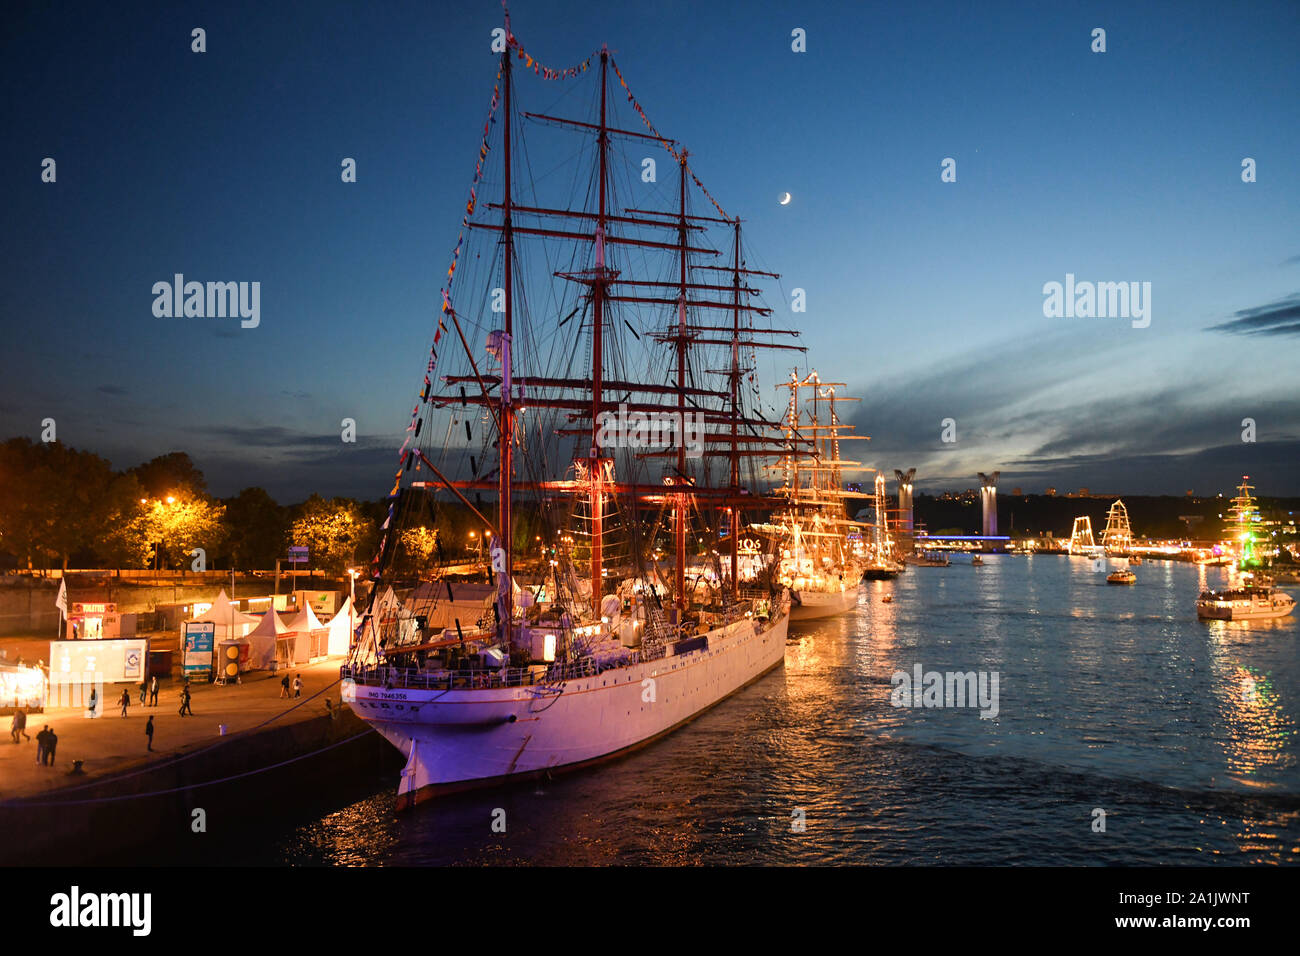 7th edition of the 'Armada du siecle' (Armada of the century) in Rouen (northern France) on June 6, 2019. Night view of the four-masted ship Sevov at Stock Photo